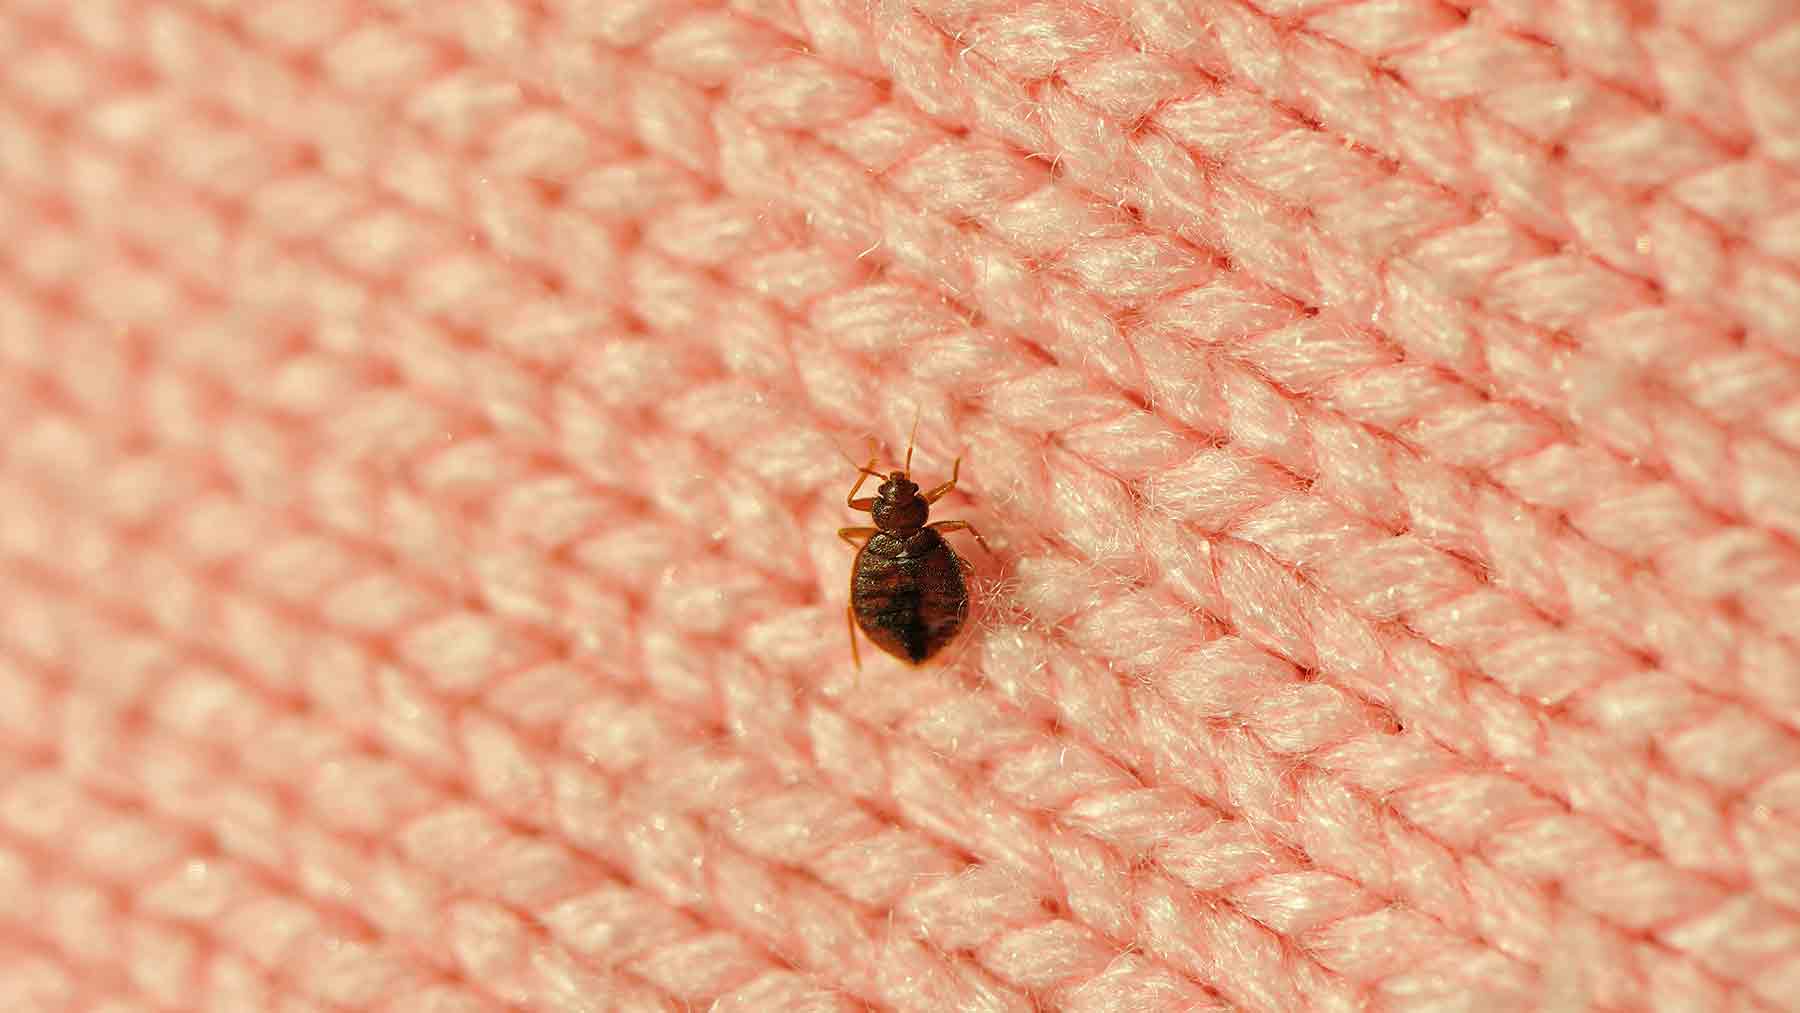 How to avoid bed bugs while traveling | Ohio State Medical Center